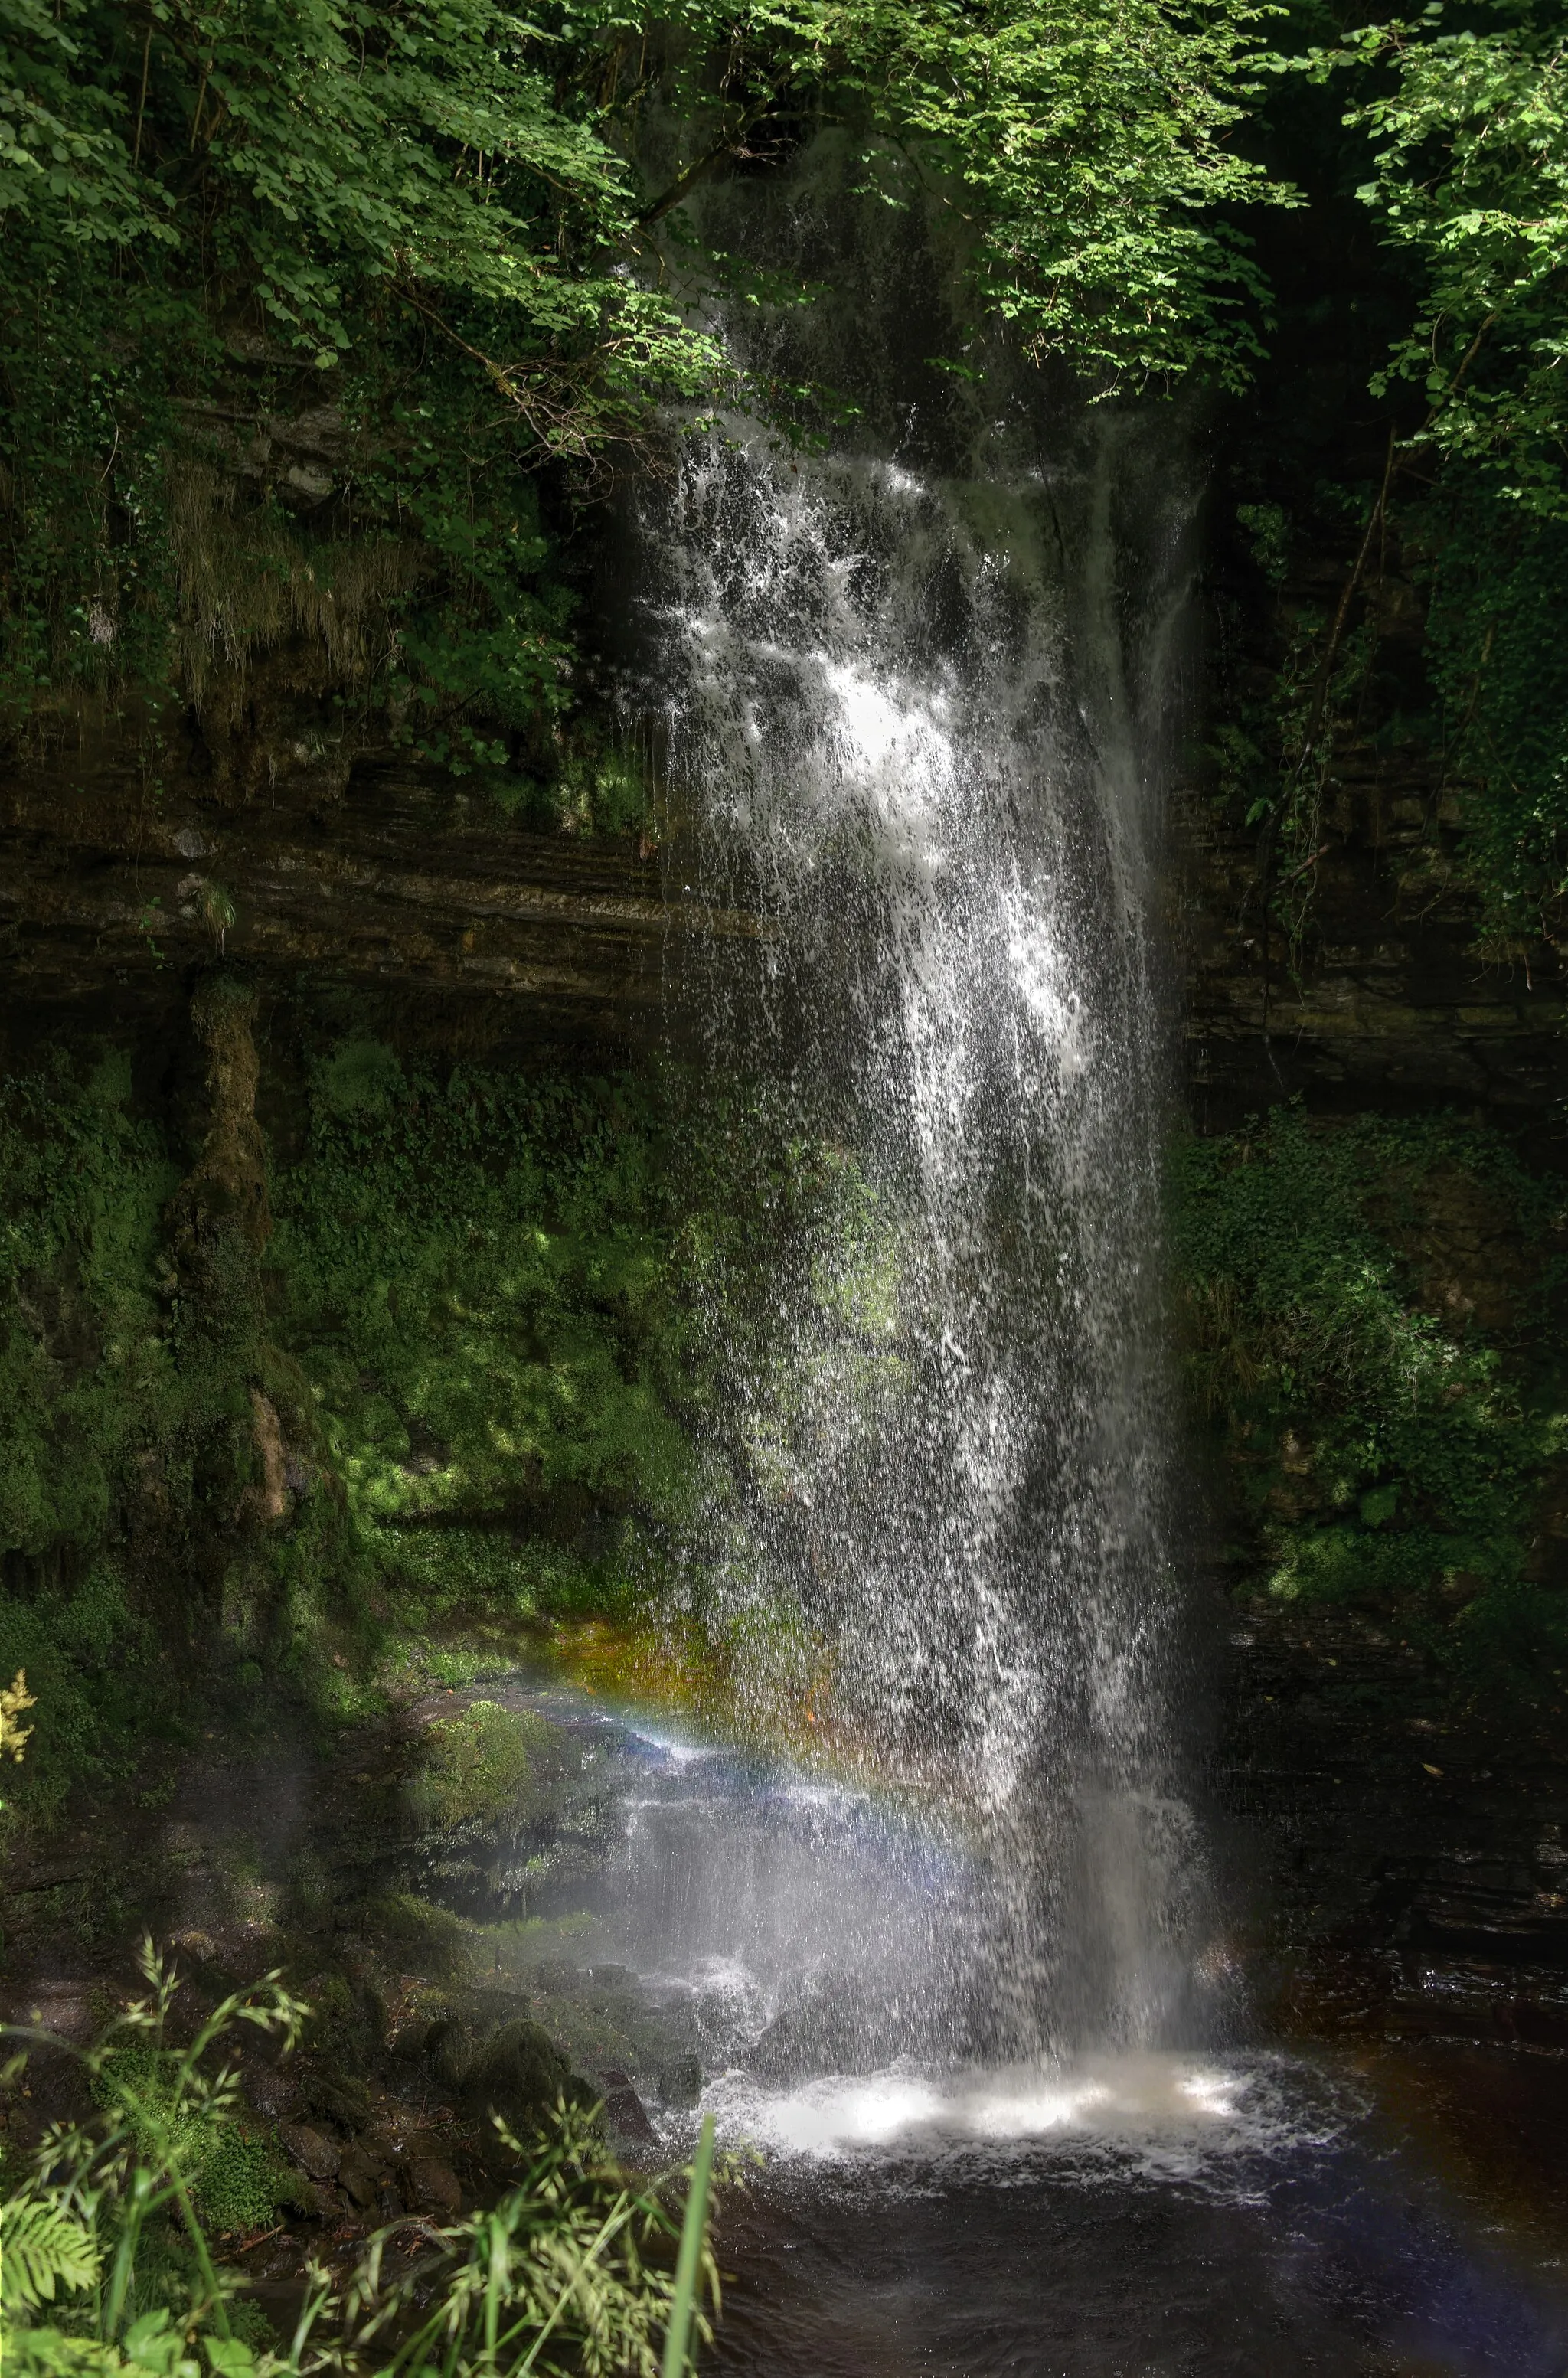 Photo showing: A small rainbow visible in the spray from Glencar Waterfall in County Leitrim, Ireland.